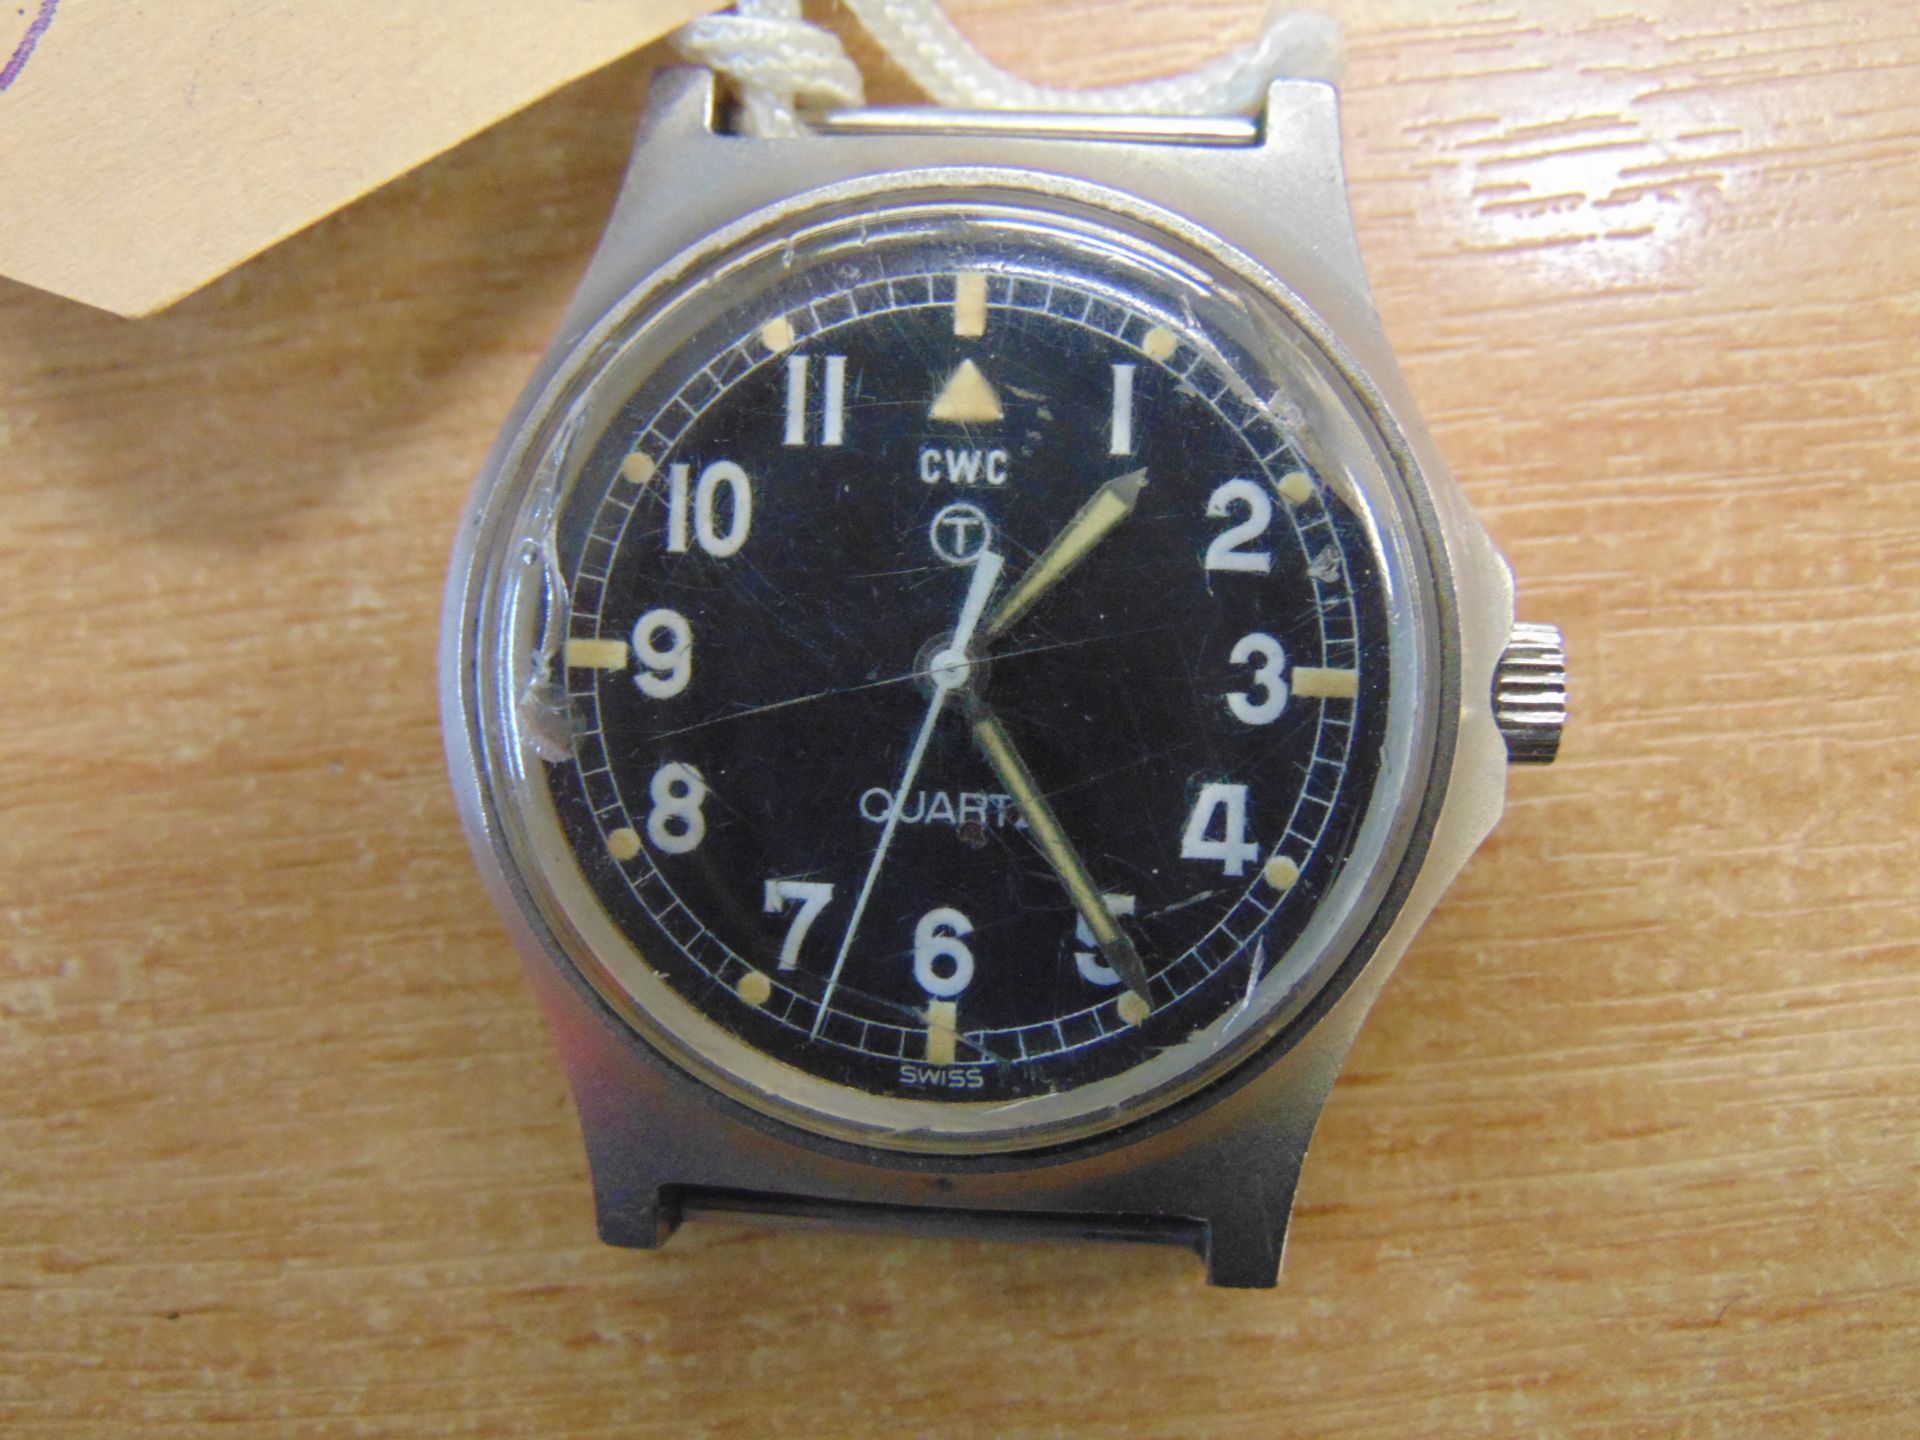 V.RARE CWC FAT BOY SERVICE WATCH NATO MARKS DATE1980 *PRE FALKLANDS WAR*SMALL CRACK IN GLASS SN.5400 - Image 2 of 5